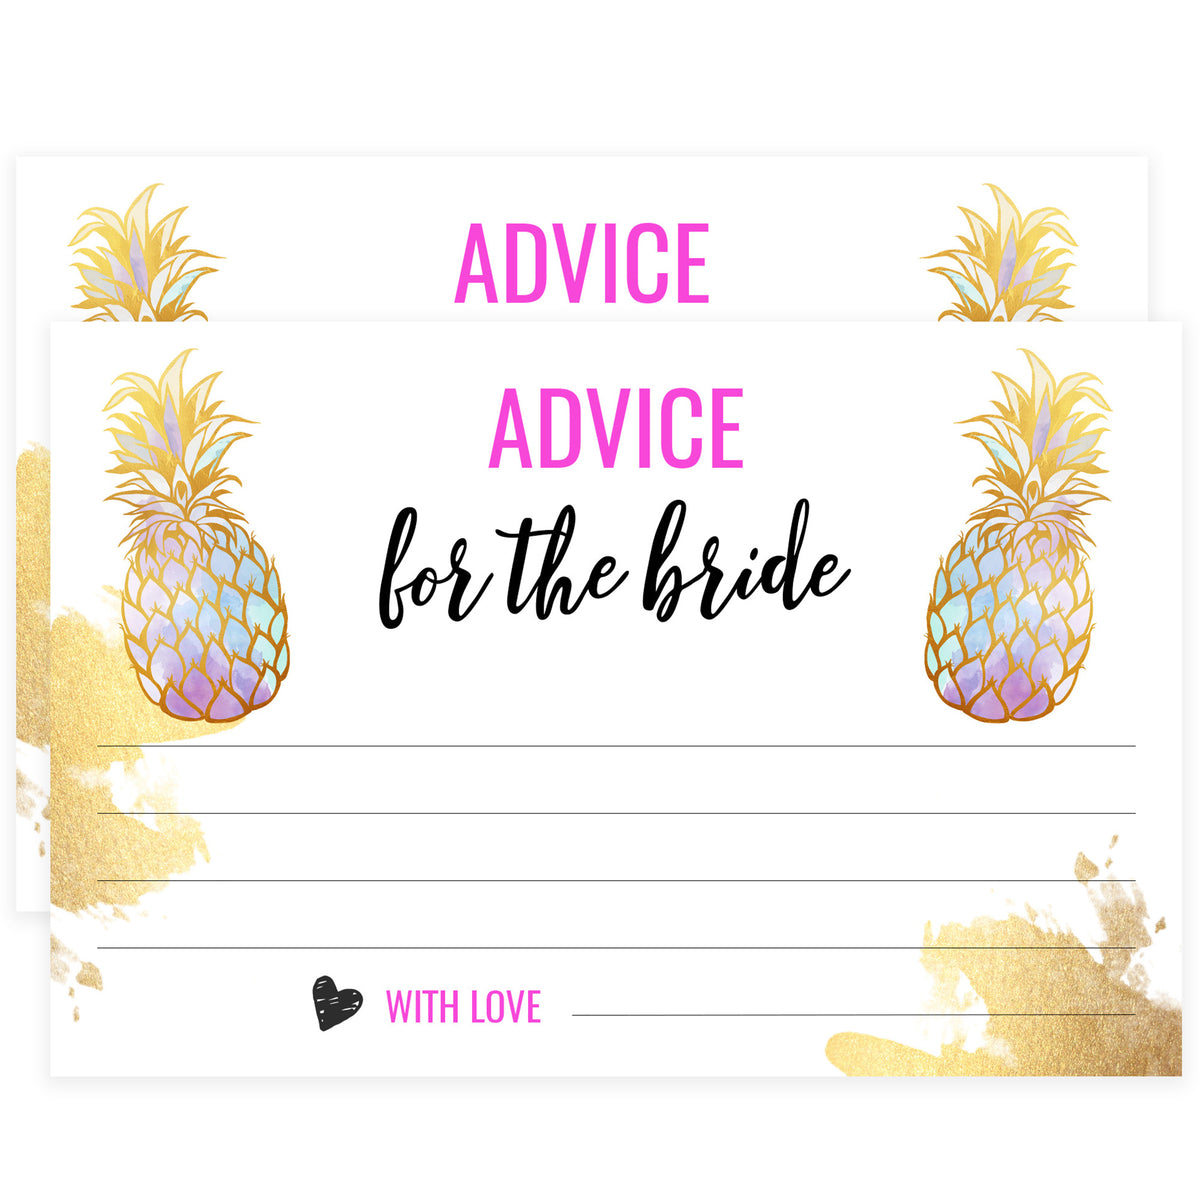 Advice for the Bride Cards - Gold Pineapple